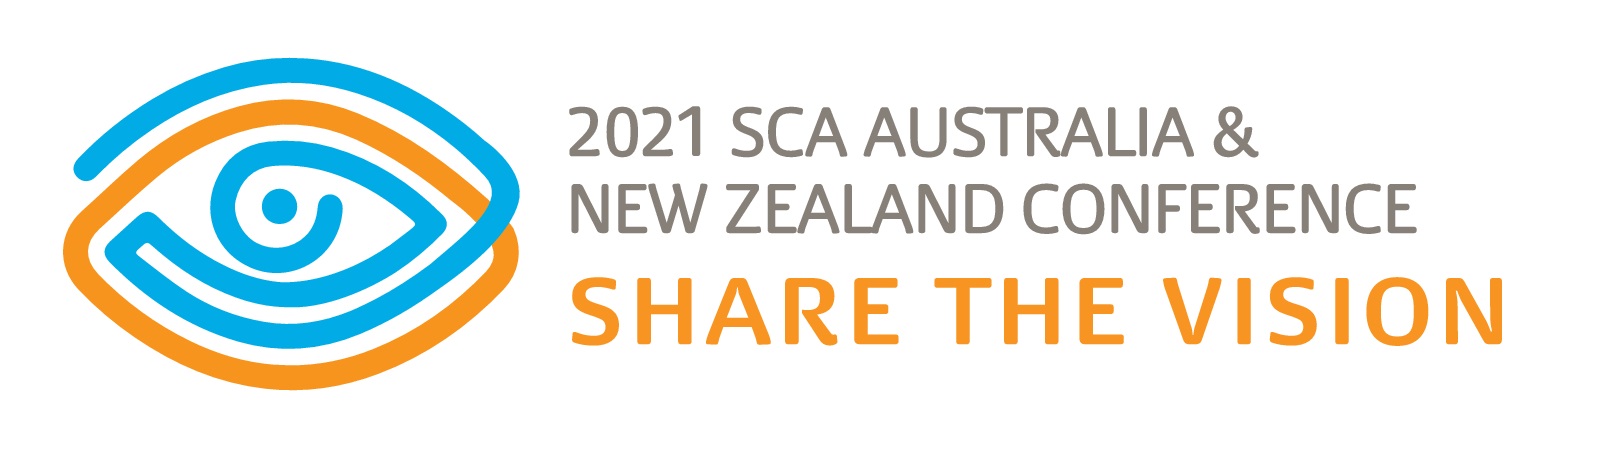 ONLINE Streaming 2021 SCA Australia & New Zealand Conference